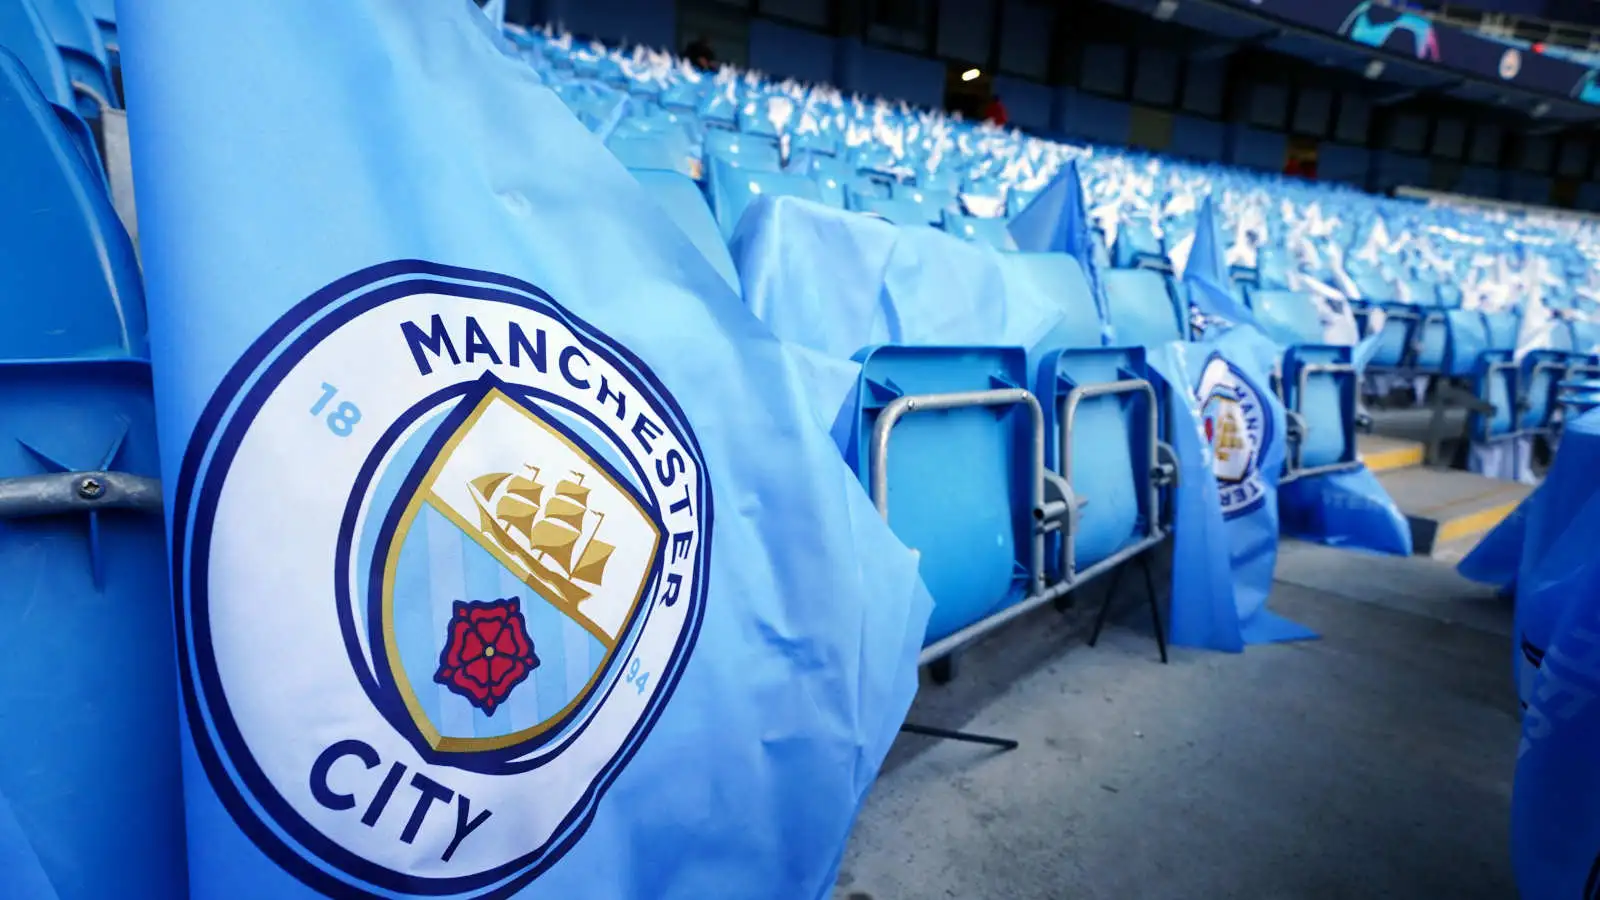 Manchester City have been charged by the Premier League with breaches of FFP